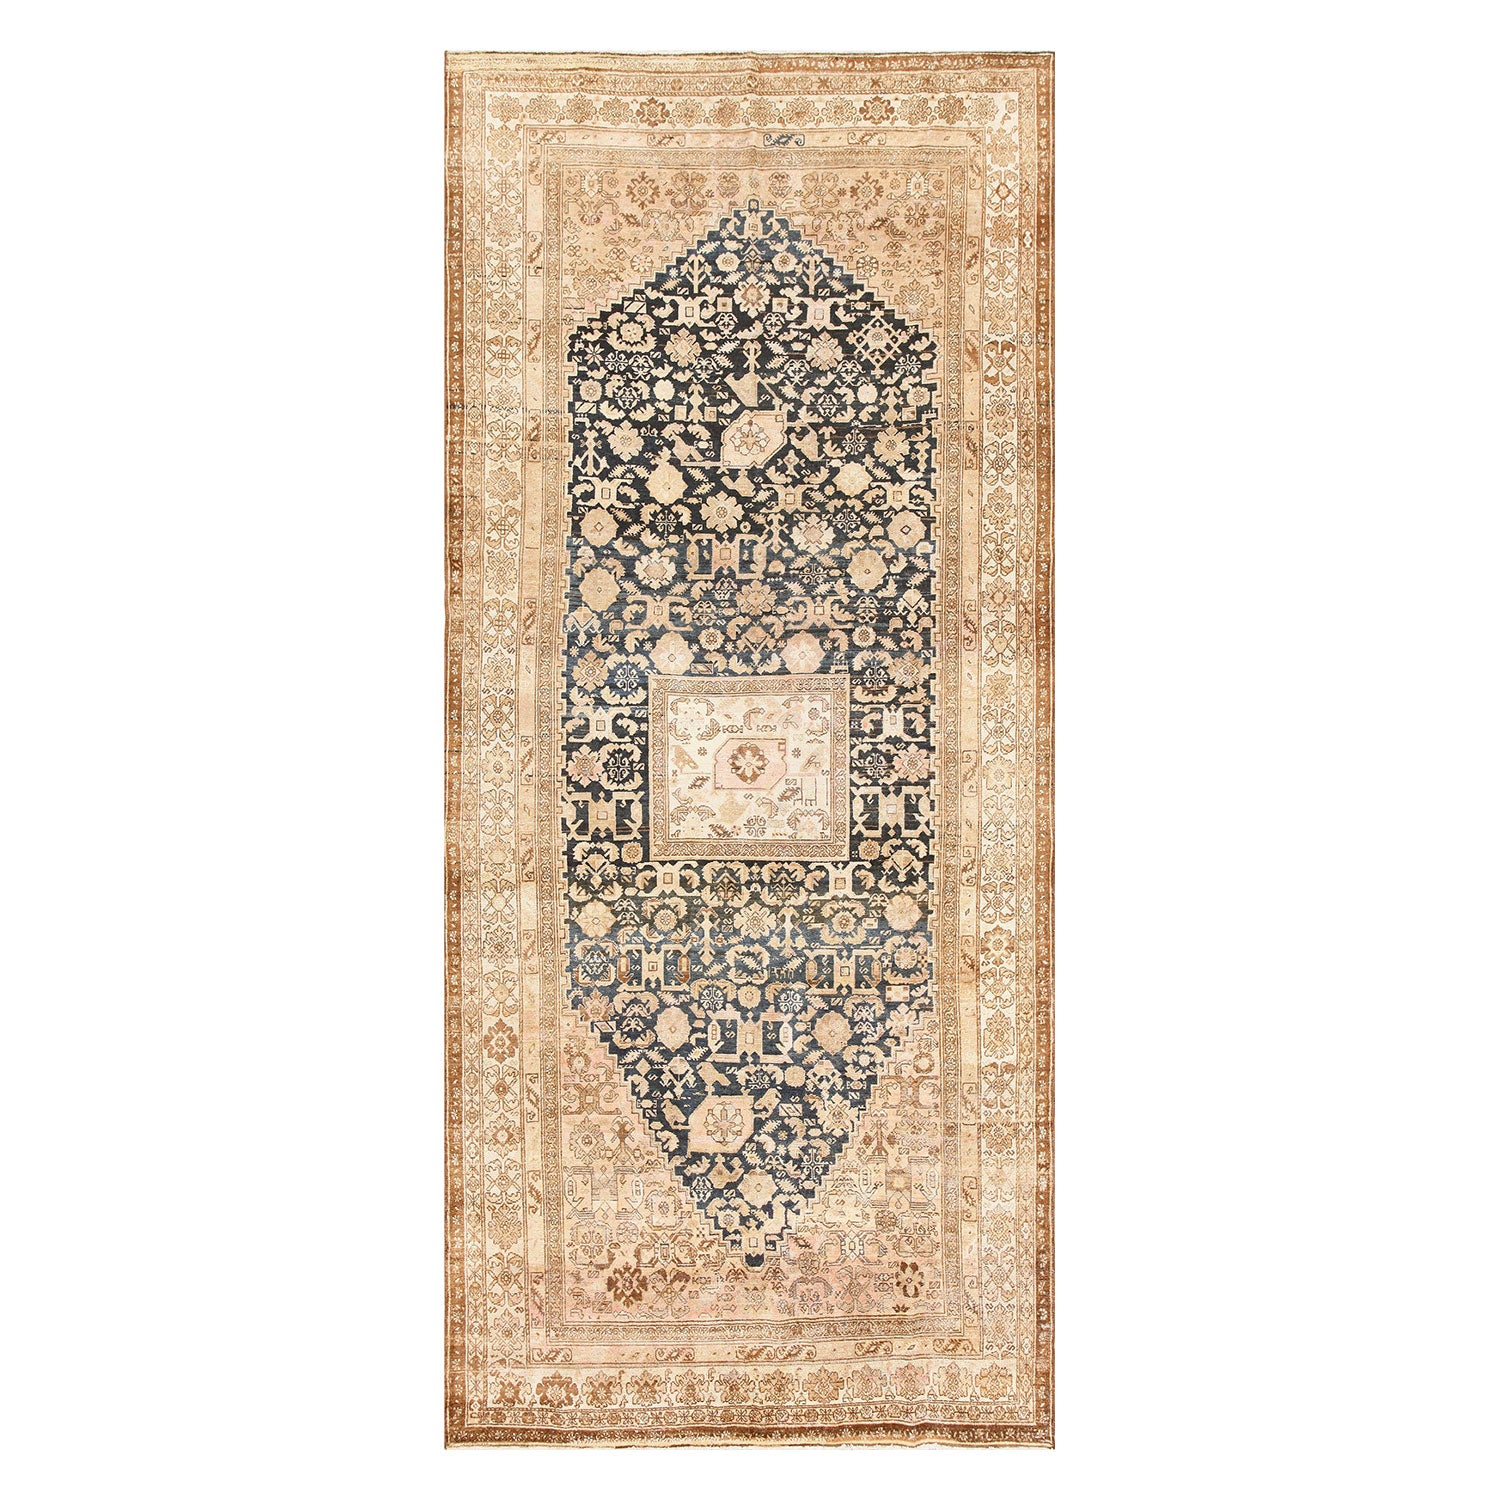 Hand-knotted Persian/Oriental rug with intricate traditional patterns and central medallion.